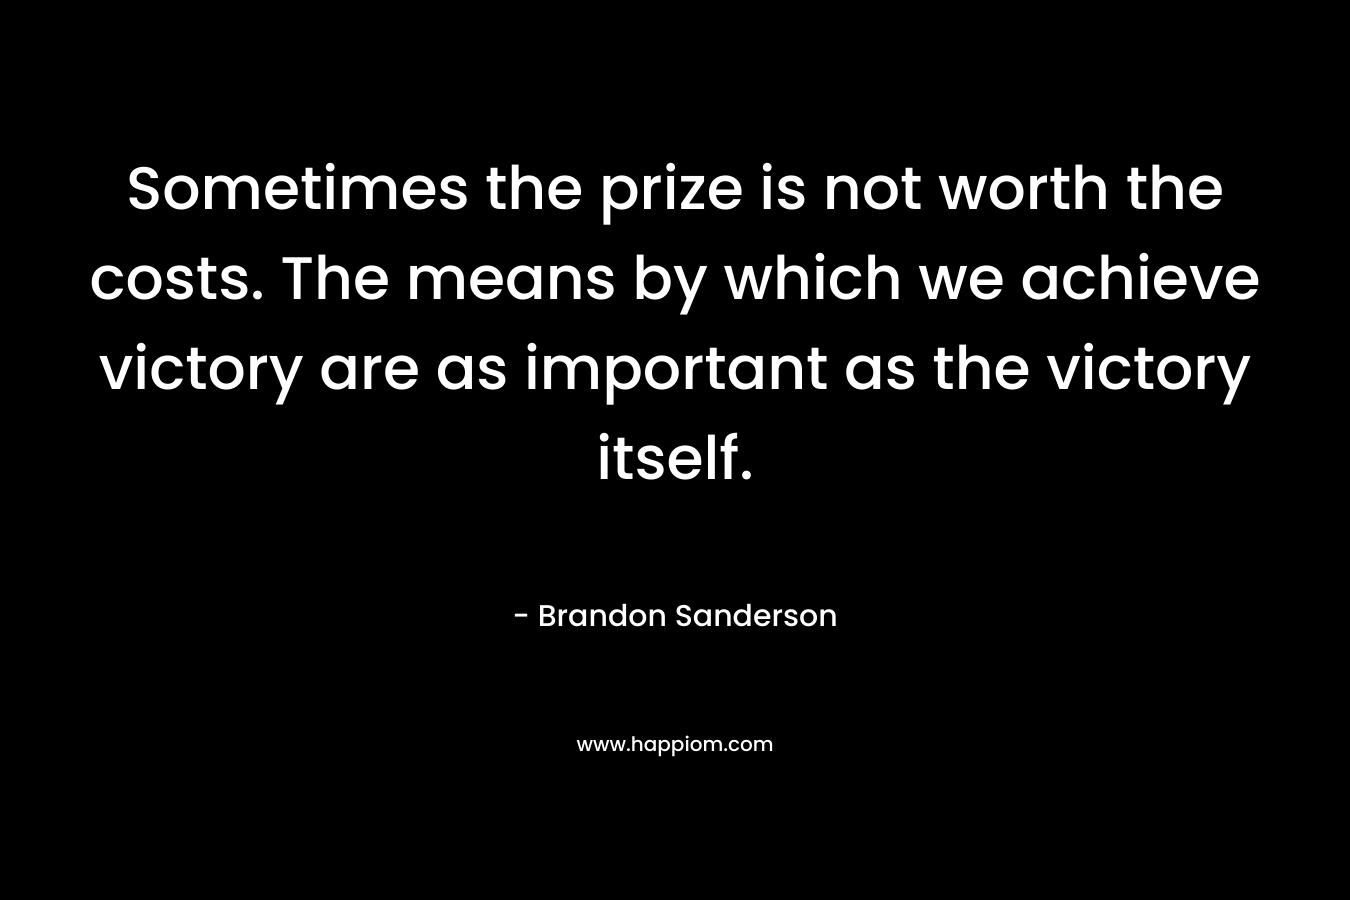 Sometimes the prize is not worth the costs. The means by which we achieve victory are as important as the victory itself. – Brandon Sanderson